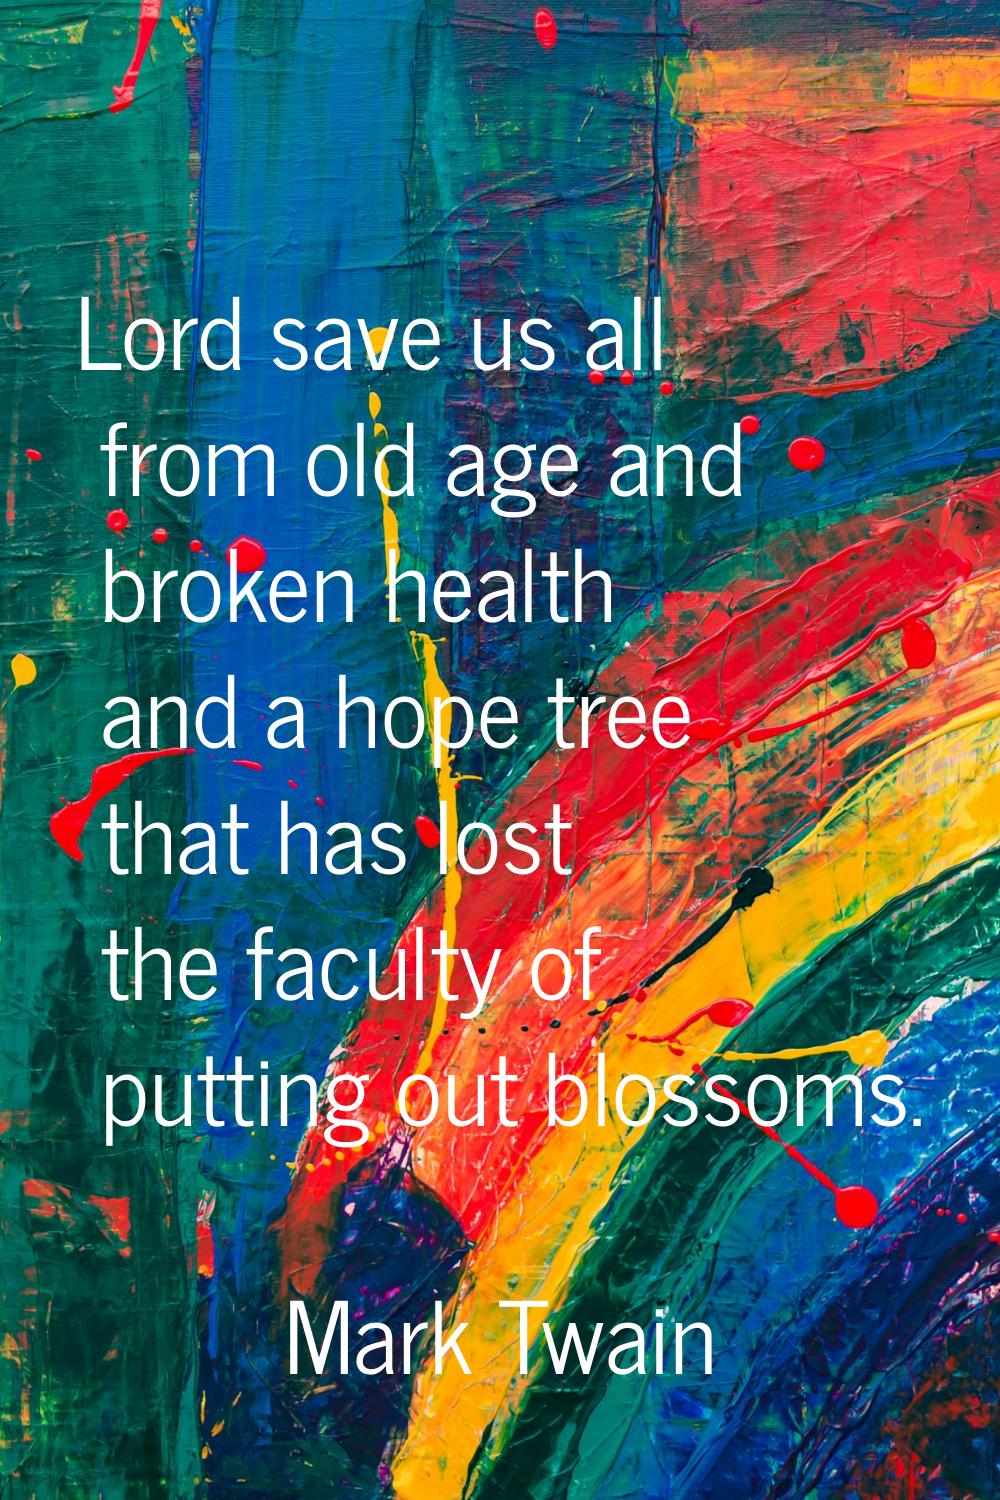 Lord save us all from old age and broken health and a hope tree that has lost the faculty of puttin